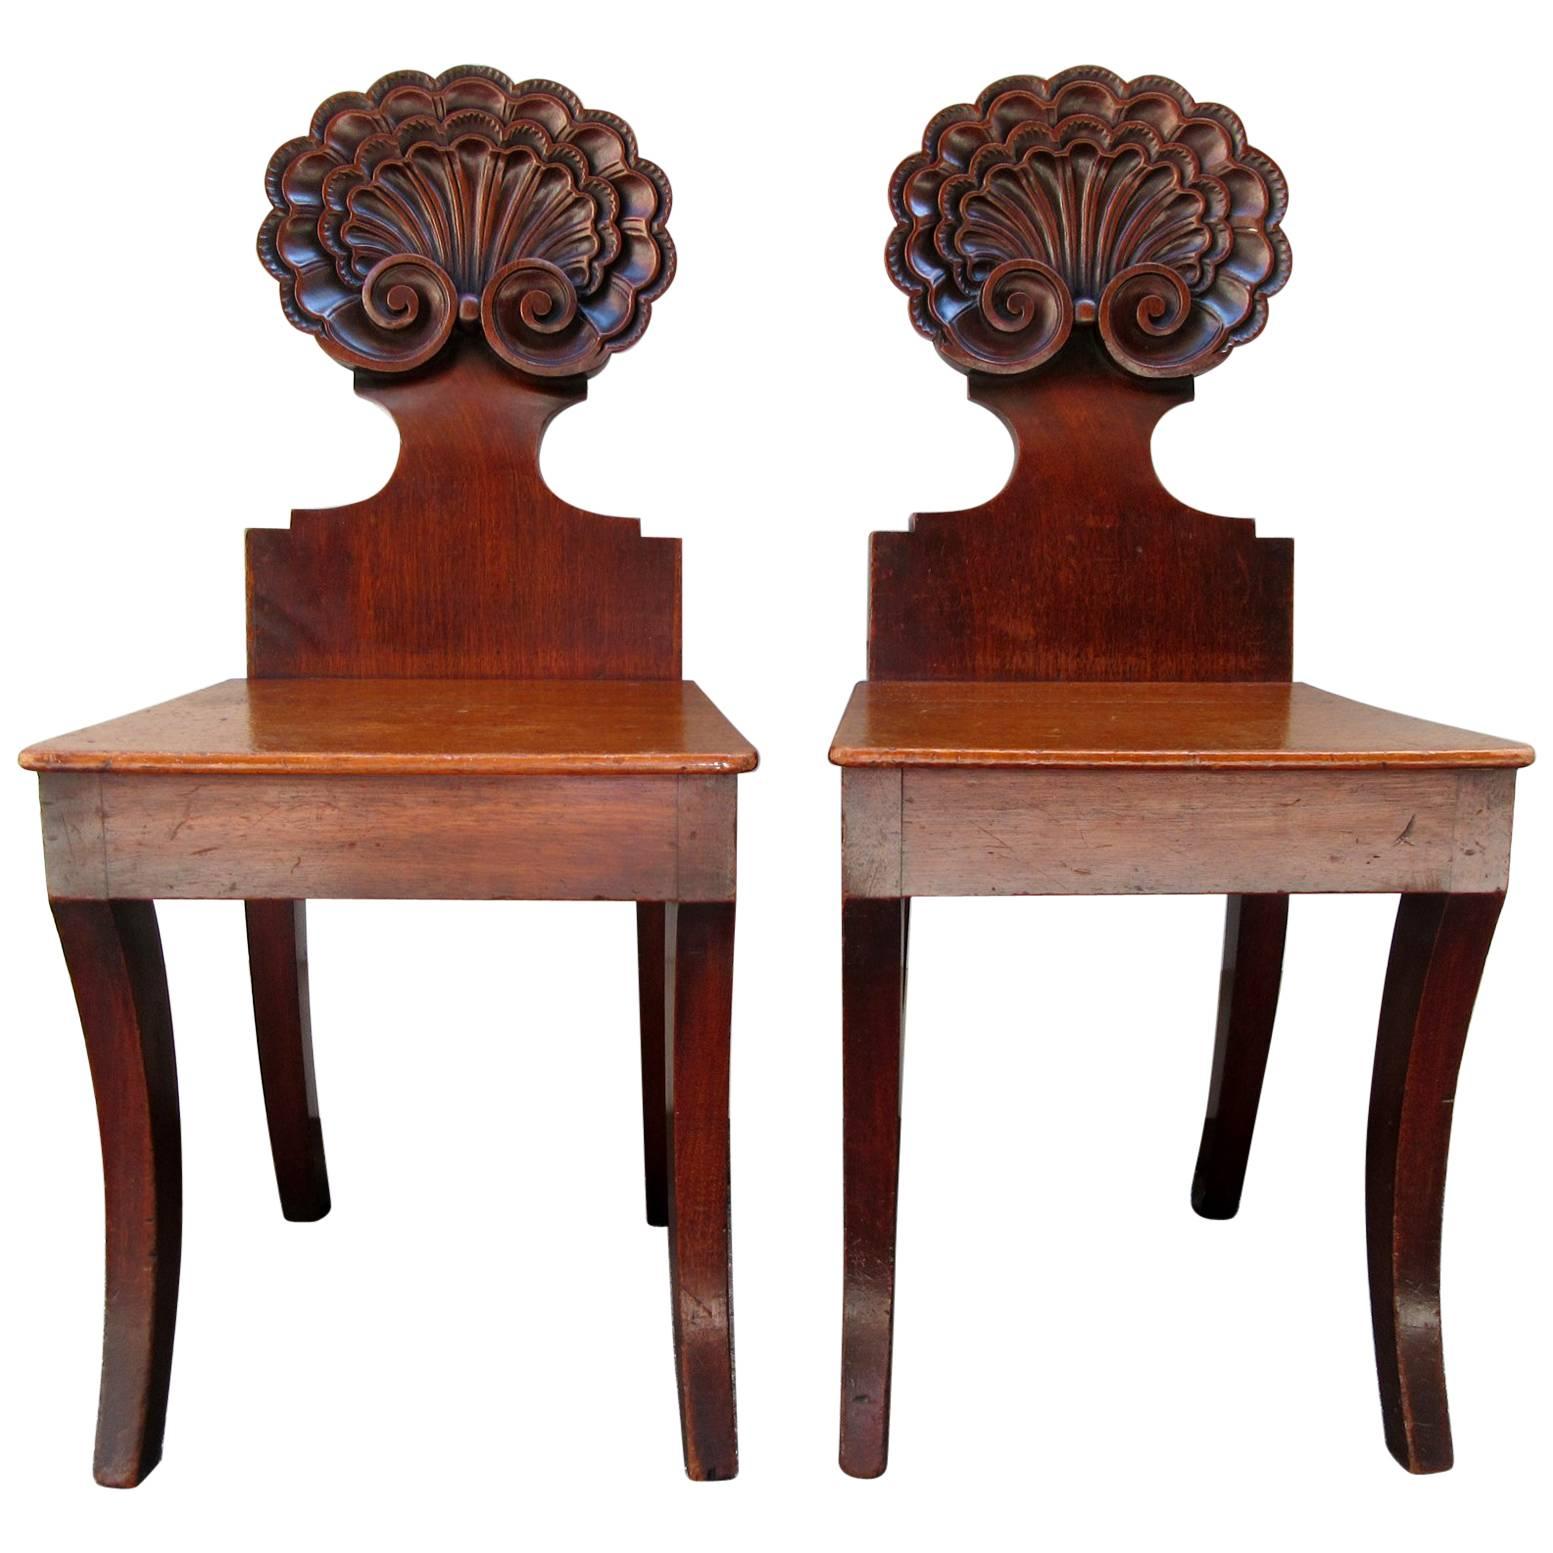 Early 19th Century English William IV Mahogany Hall Chairs Attributed to Gillows